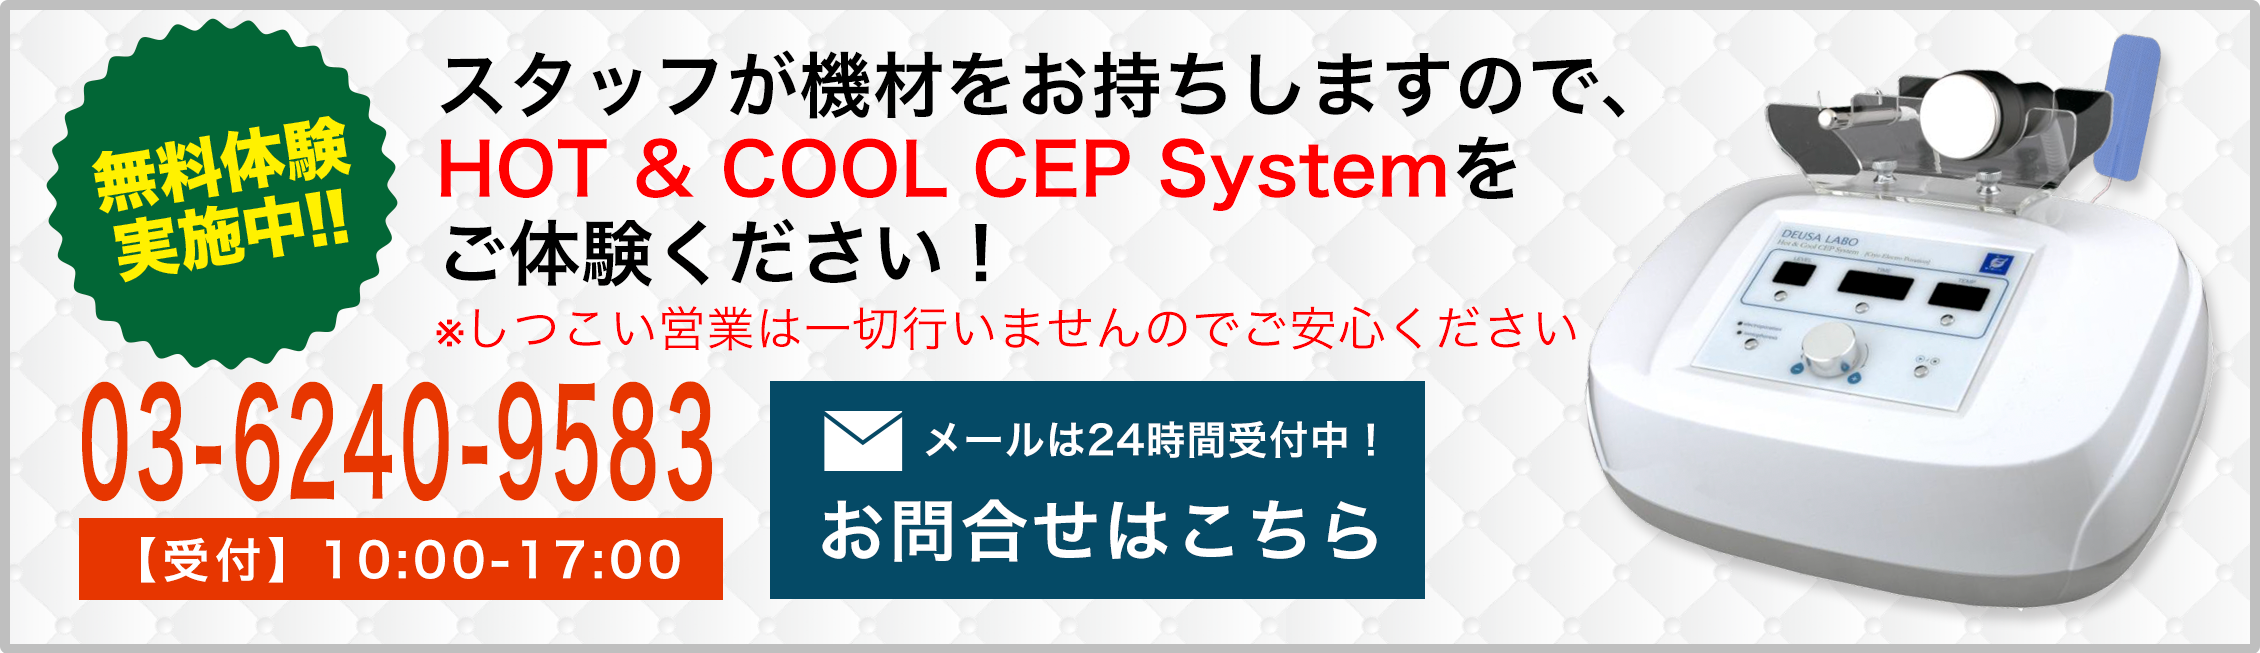 HOT & COOL CEP System